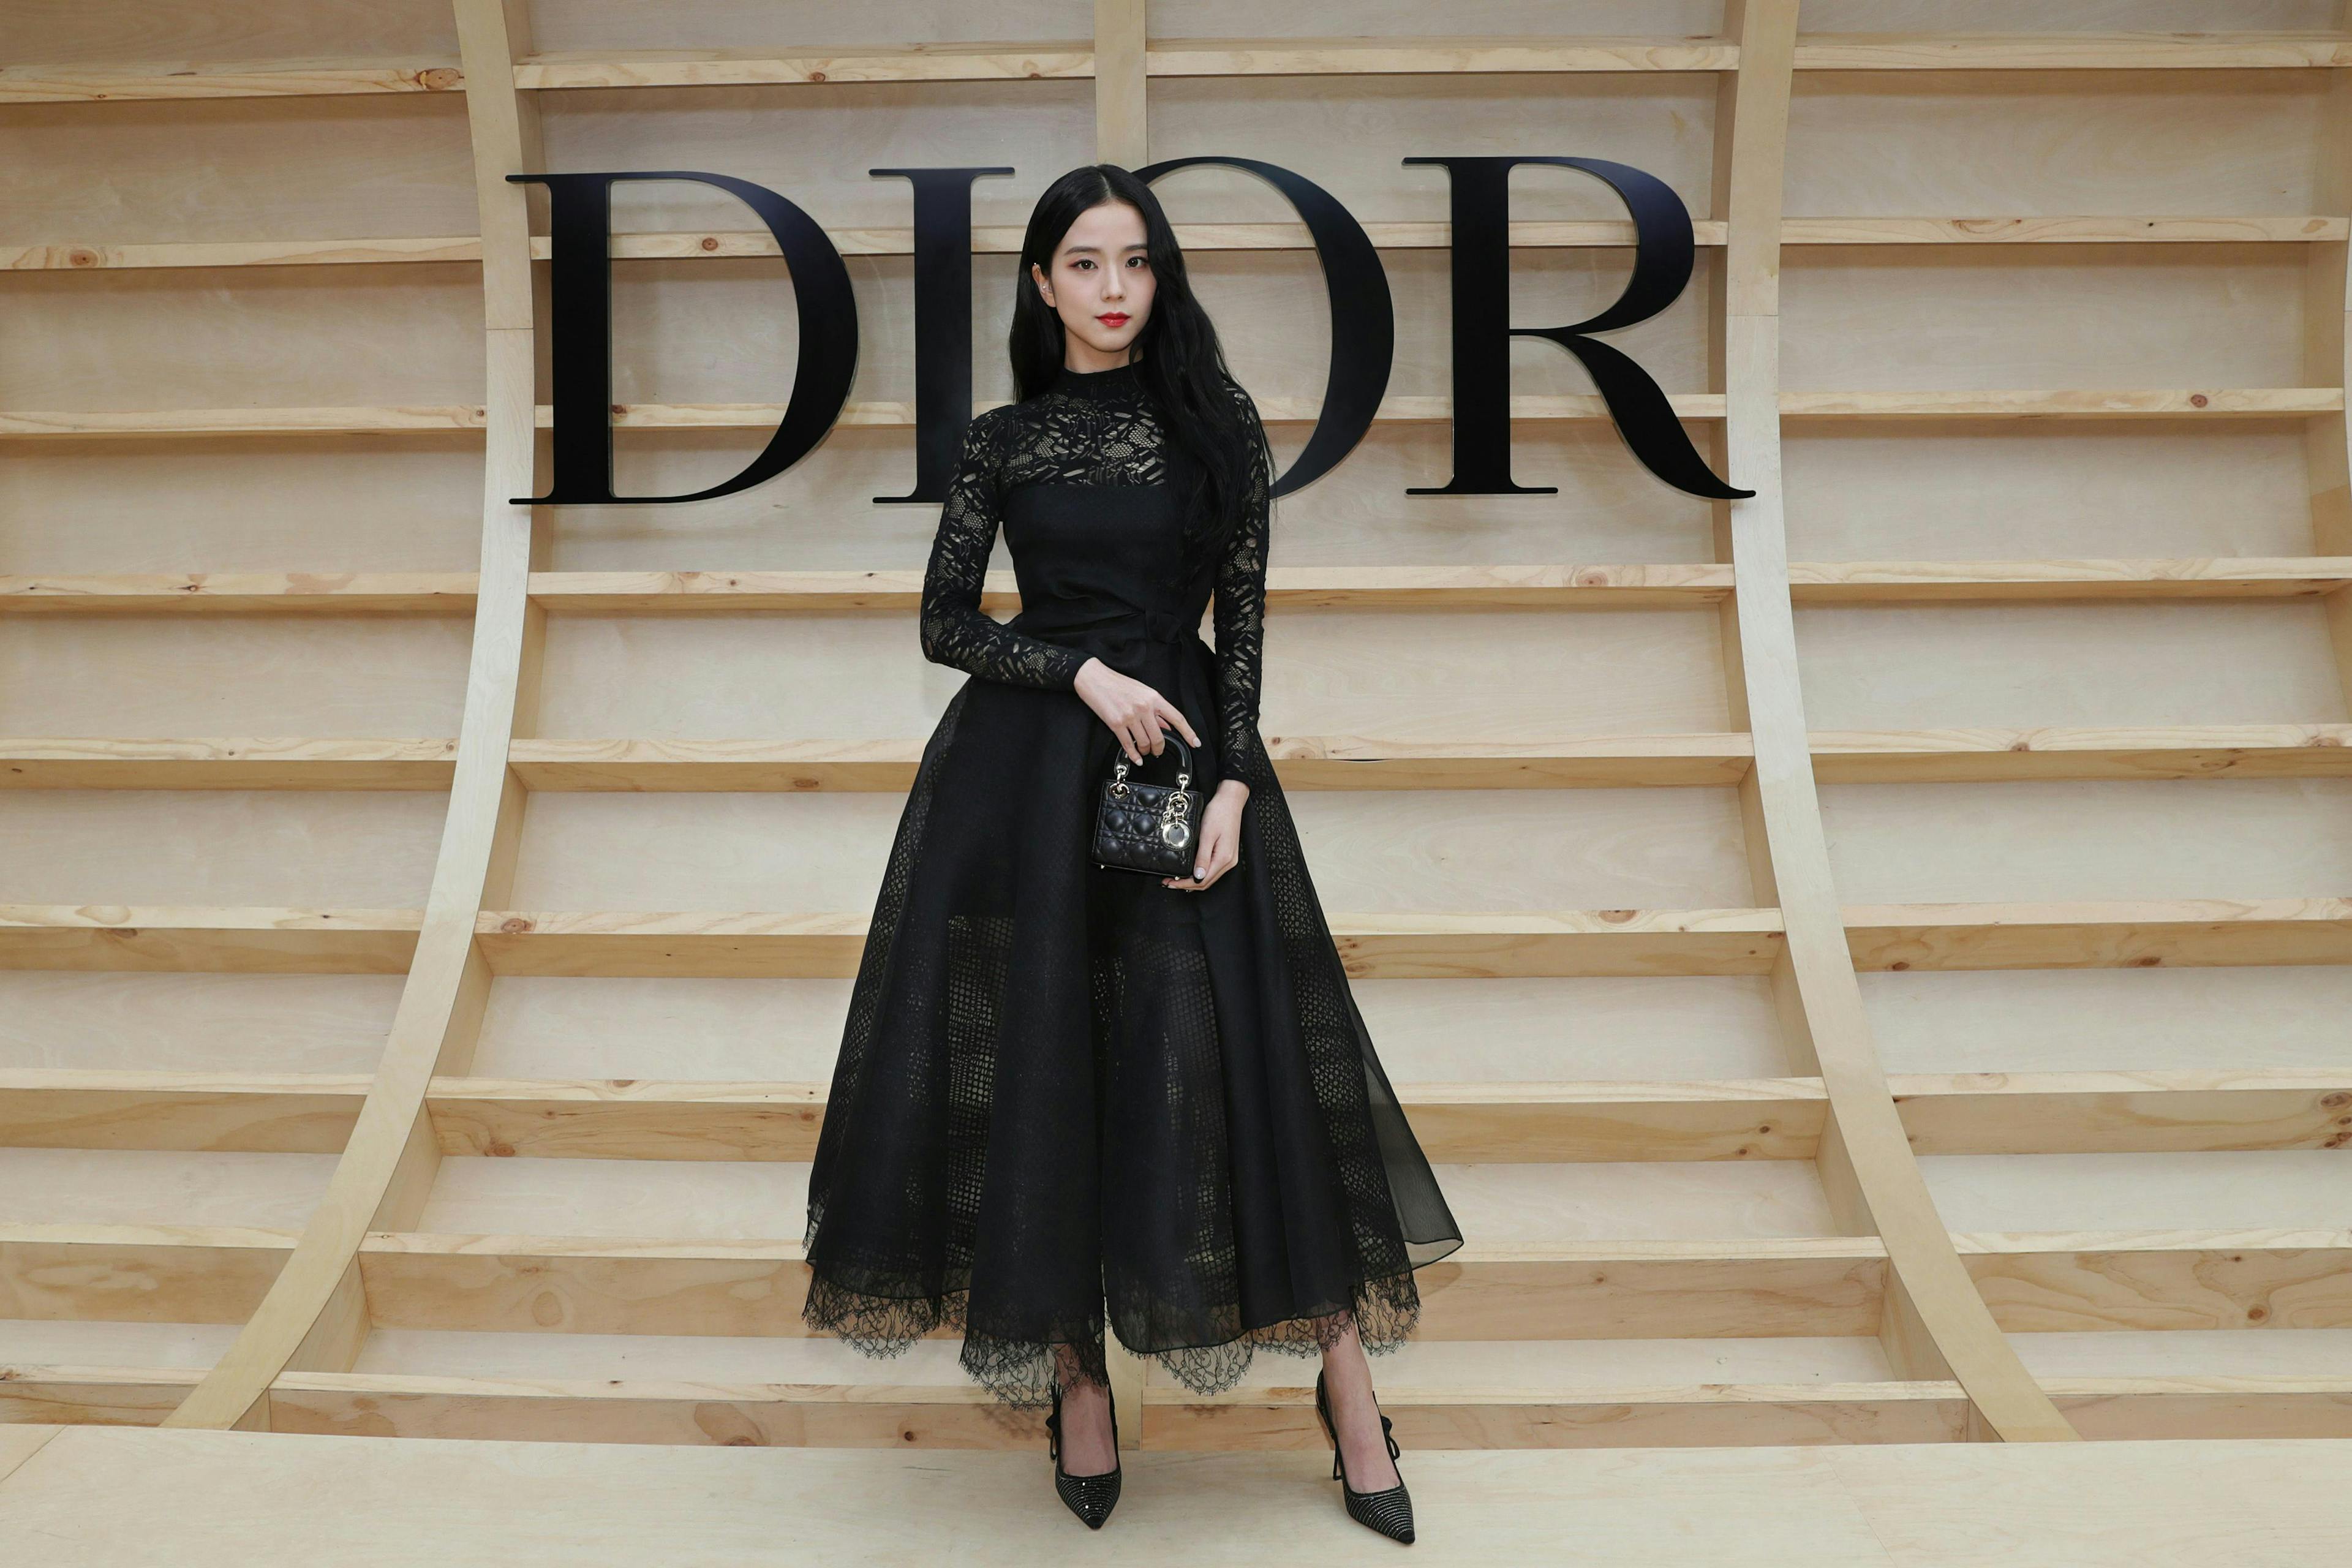 Global ambassador for Dior Fashion and Beauty, Jisoo, complemented her Dior Winter 2022/23 black embroidered dress with a black lace top with a mini Lady Dior bag and Dior shoes.